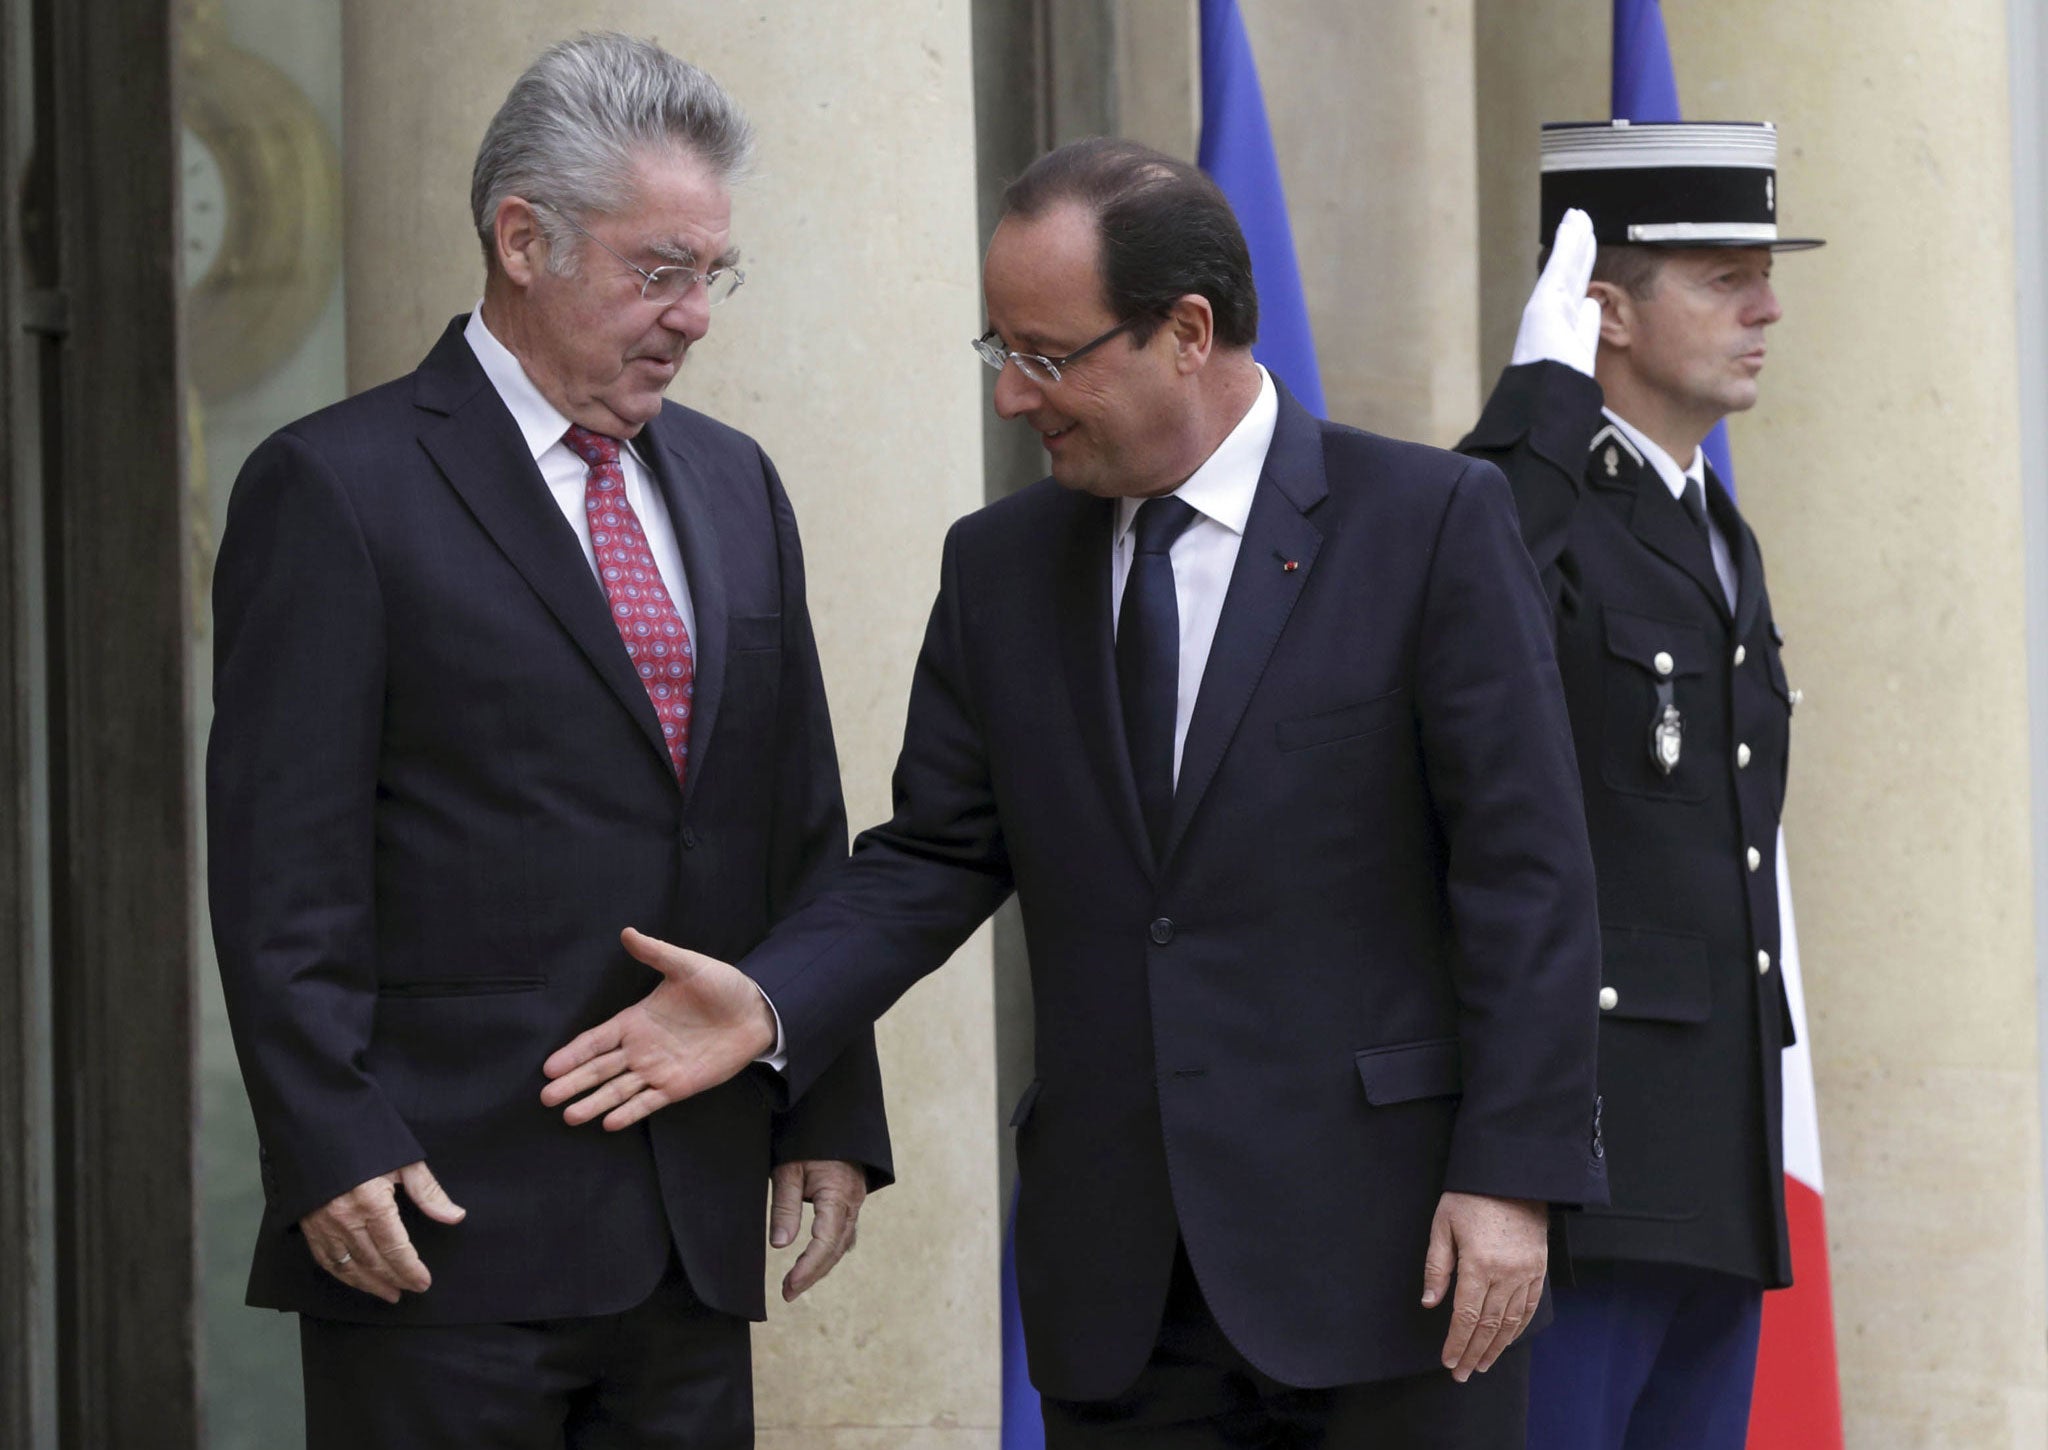 Awkward positioning: Francois Hollande goes for a handshake with Austrian President Heinz Fischer but misses the target